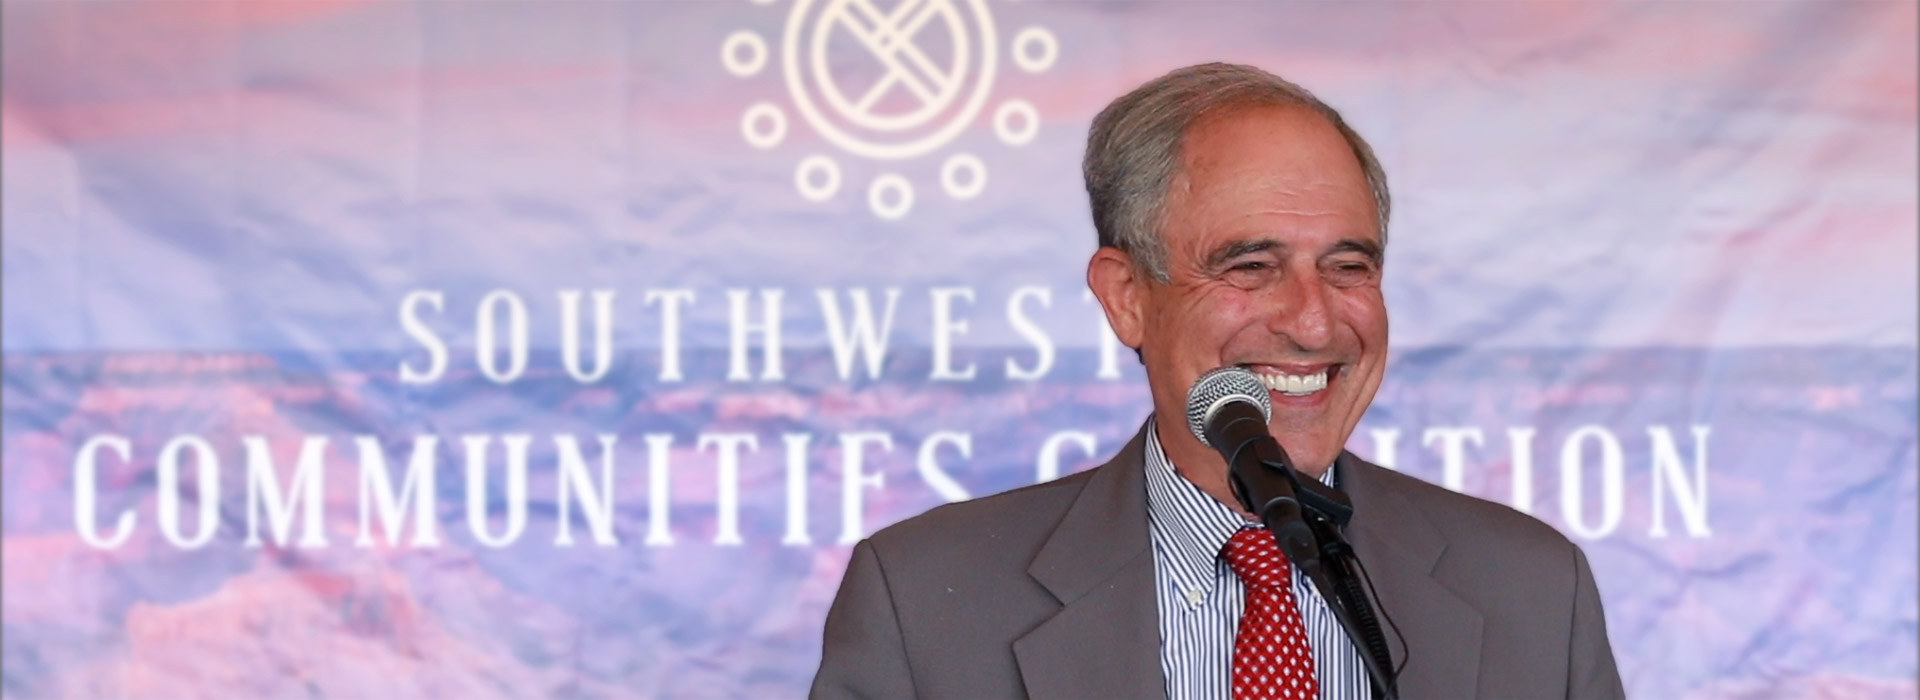 Fact’s Matter: Lanny Davis Delivers Passionate Address at SW Communities Coalition Luncheon